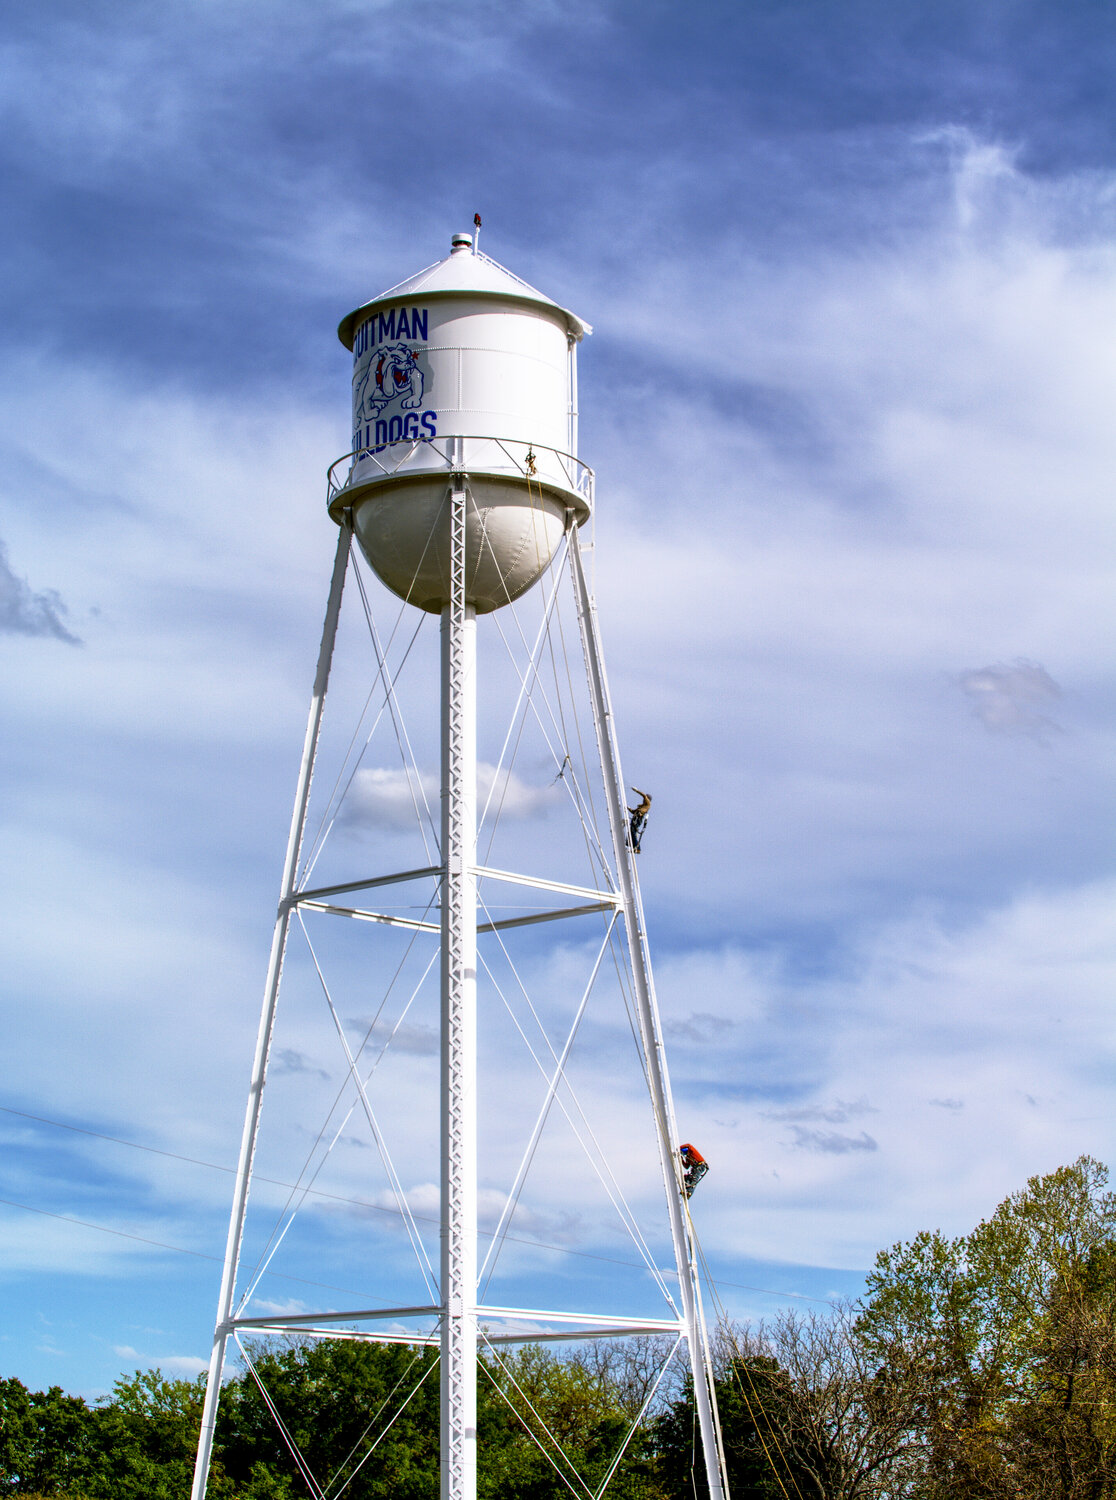 Workers put the finishing touches on Quitman’s water tower paint job.